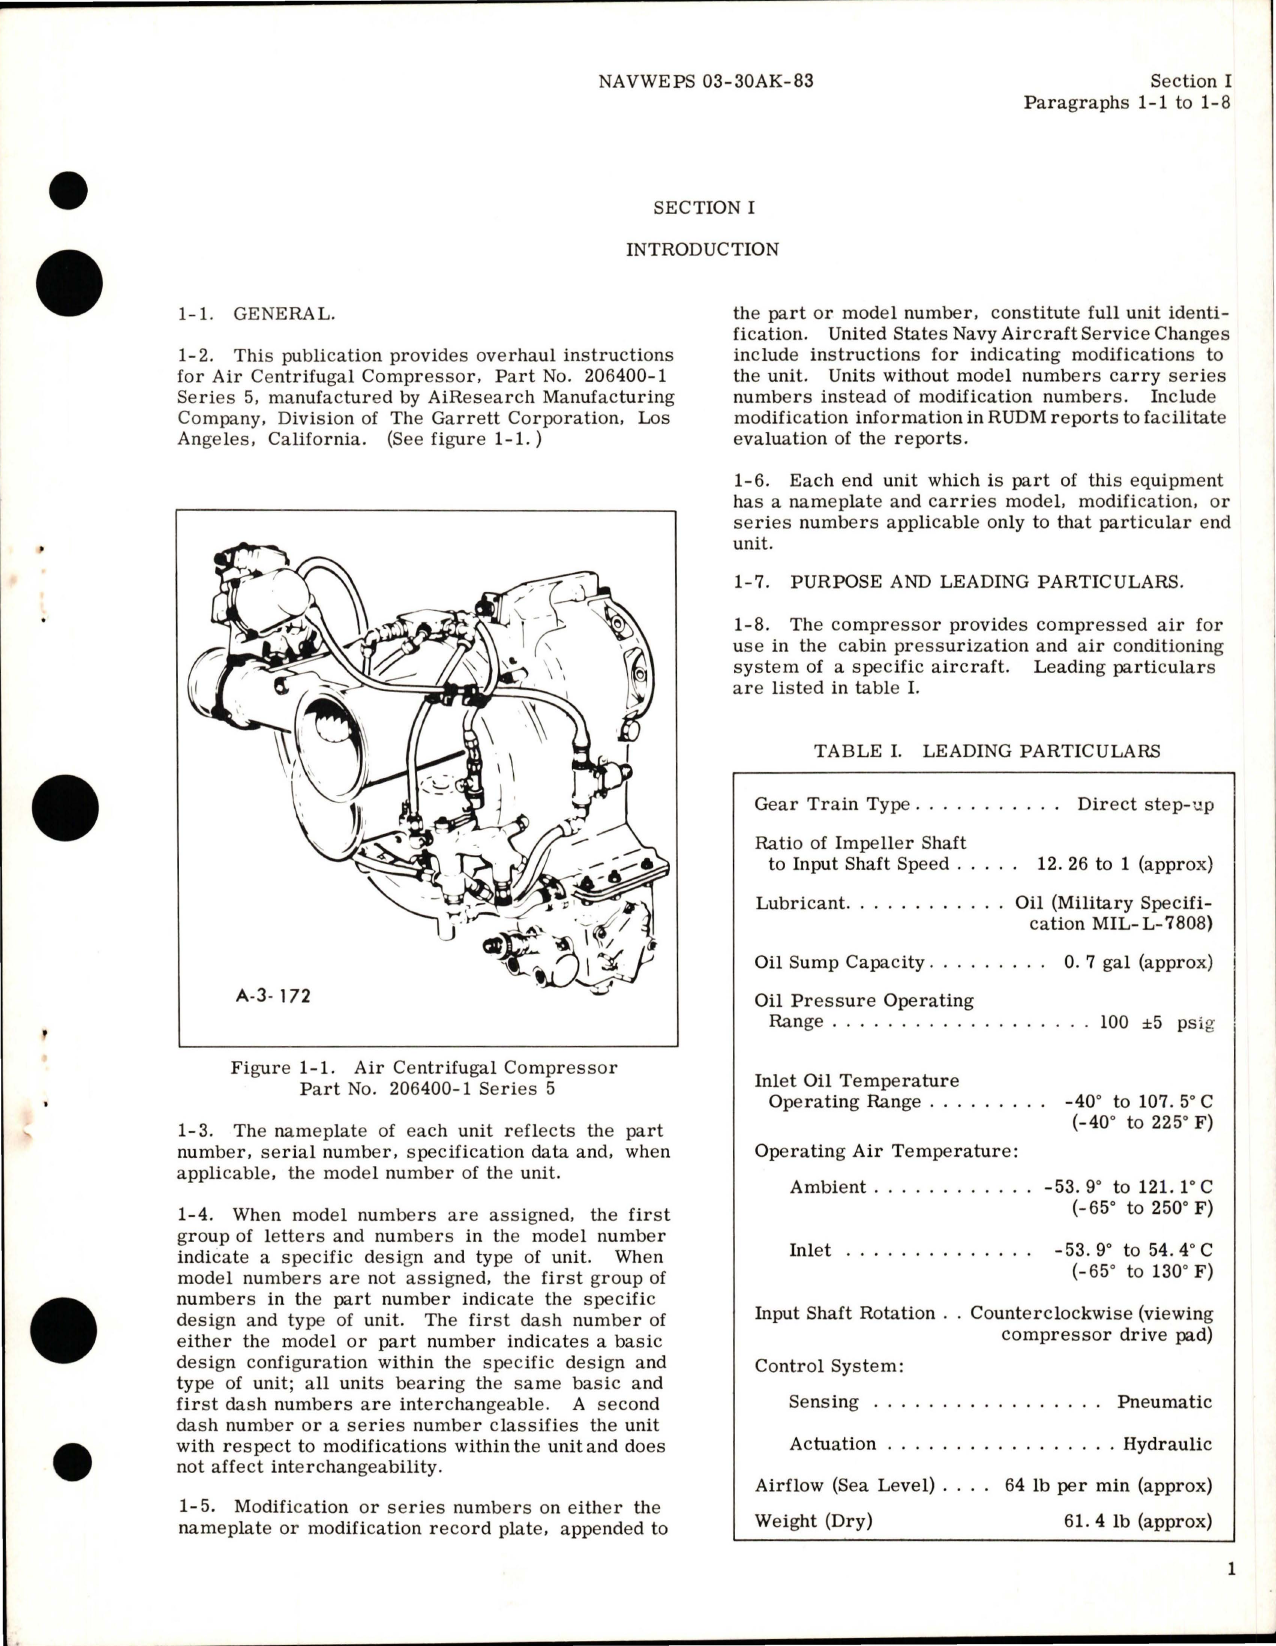 Sample page 5 from AirCorps Library document: Overhaul Instructions for Centrifugal Air Compressor - Parts 206400-1, 206400-1-6, 206400-1-7, and 206400-1-8